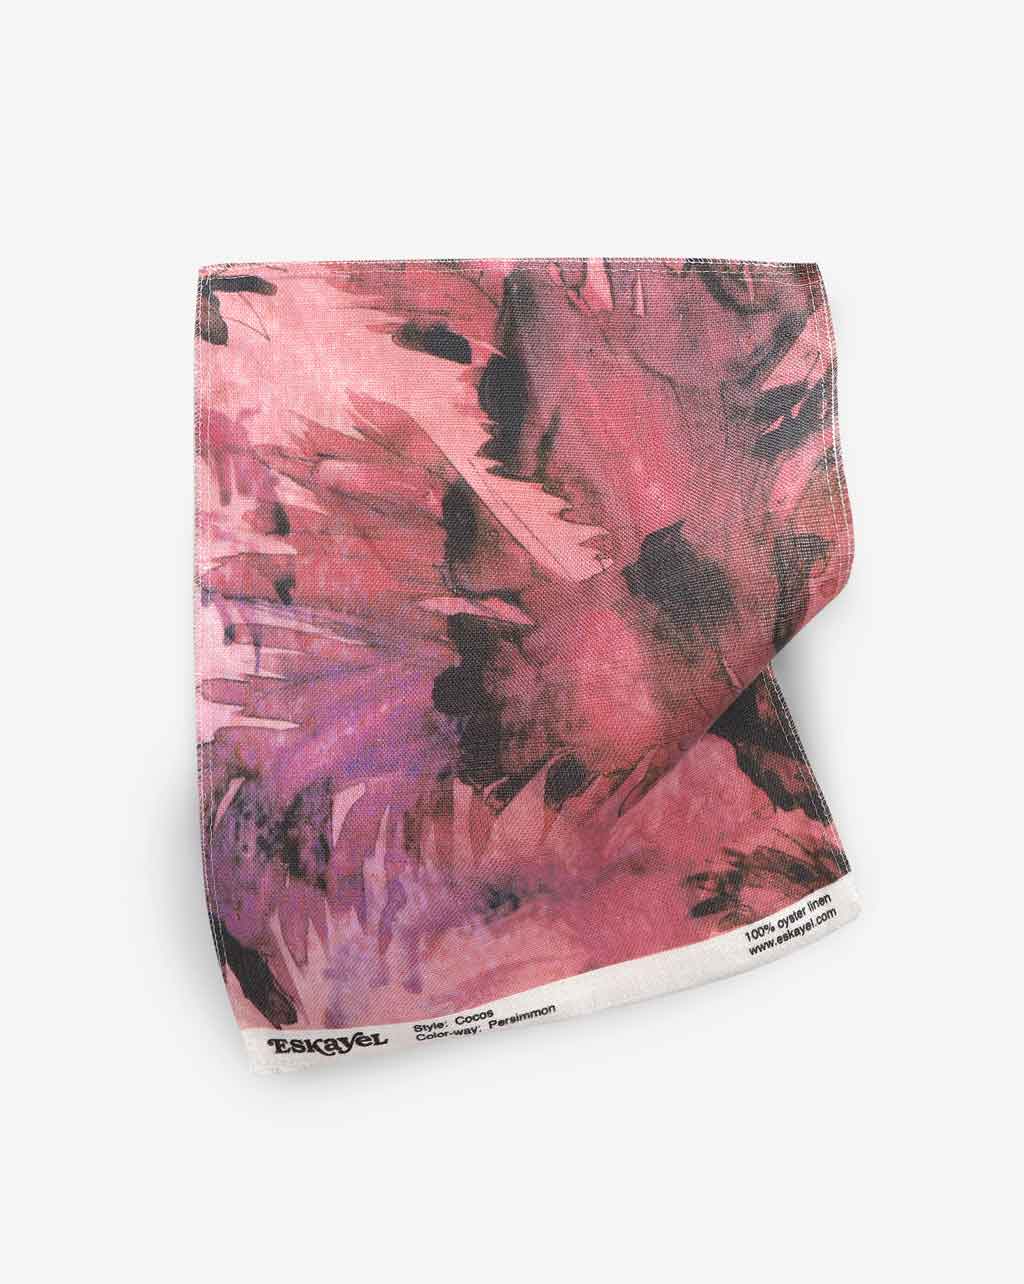 A luxury pink and black Cocos Fabric Persimmon painting on a piece of fabric featuring palm tree motifs